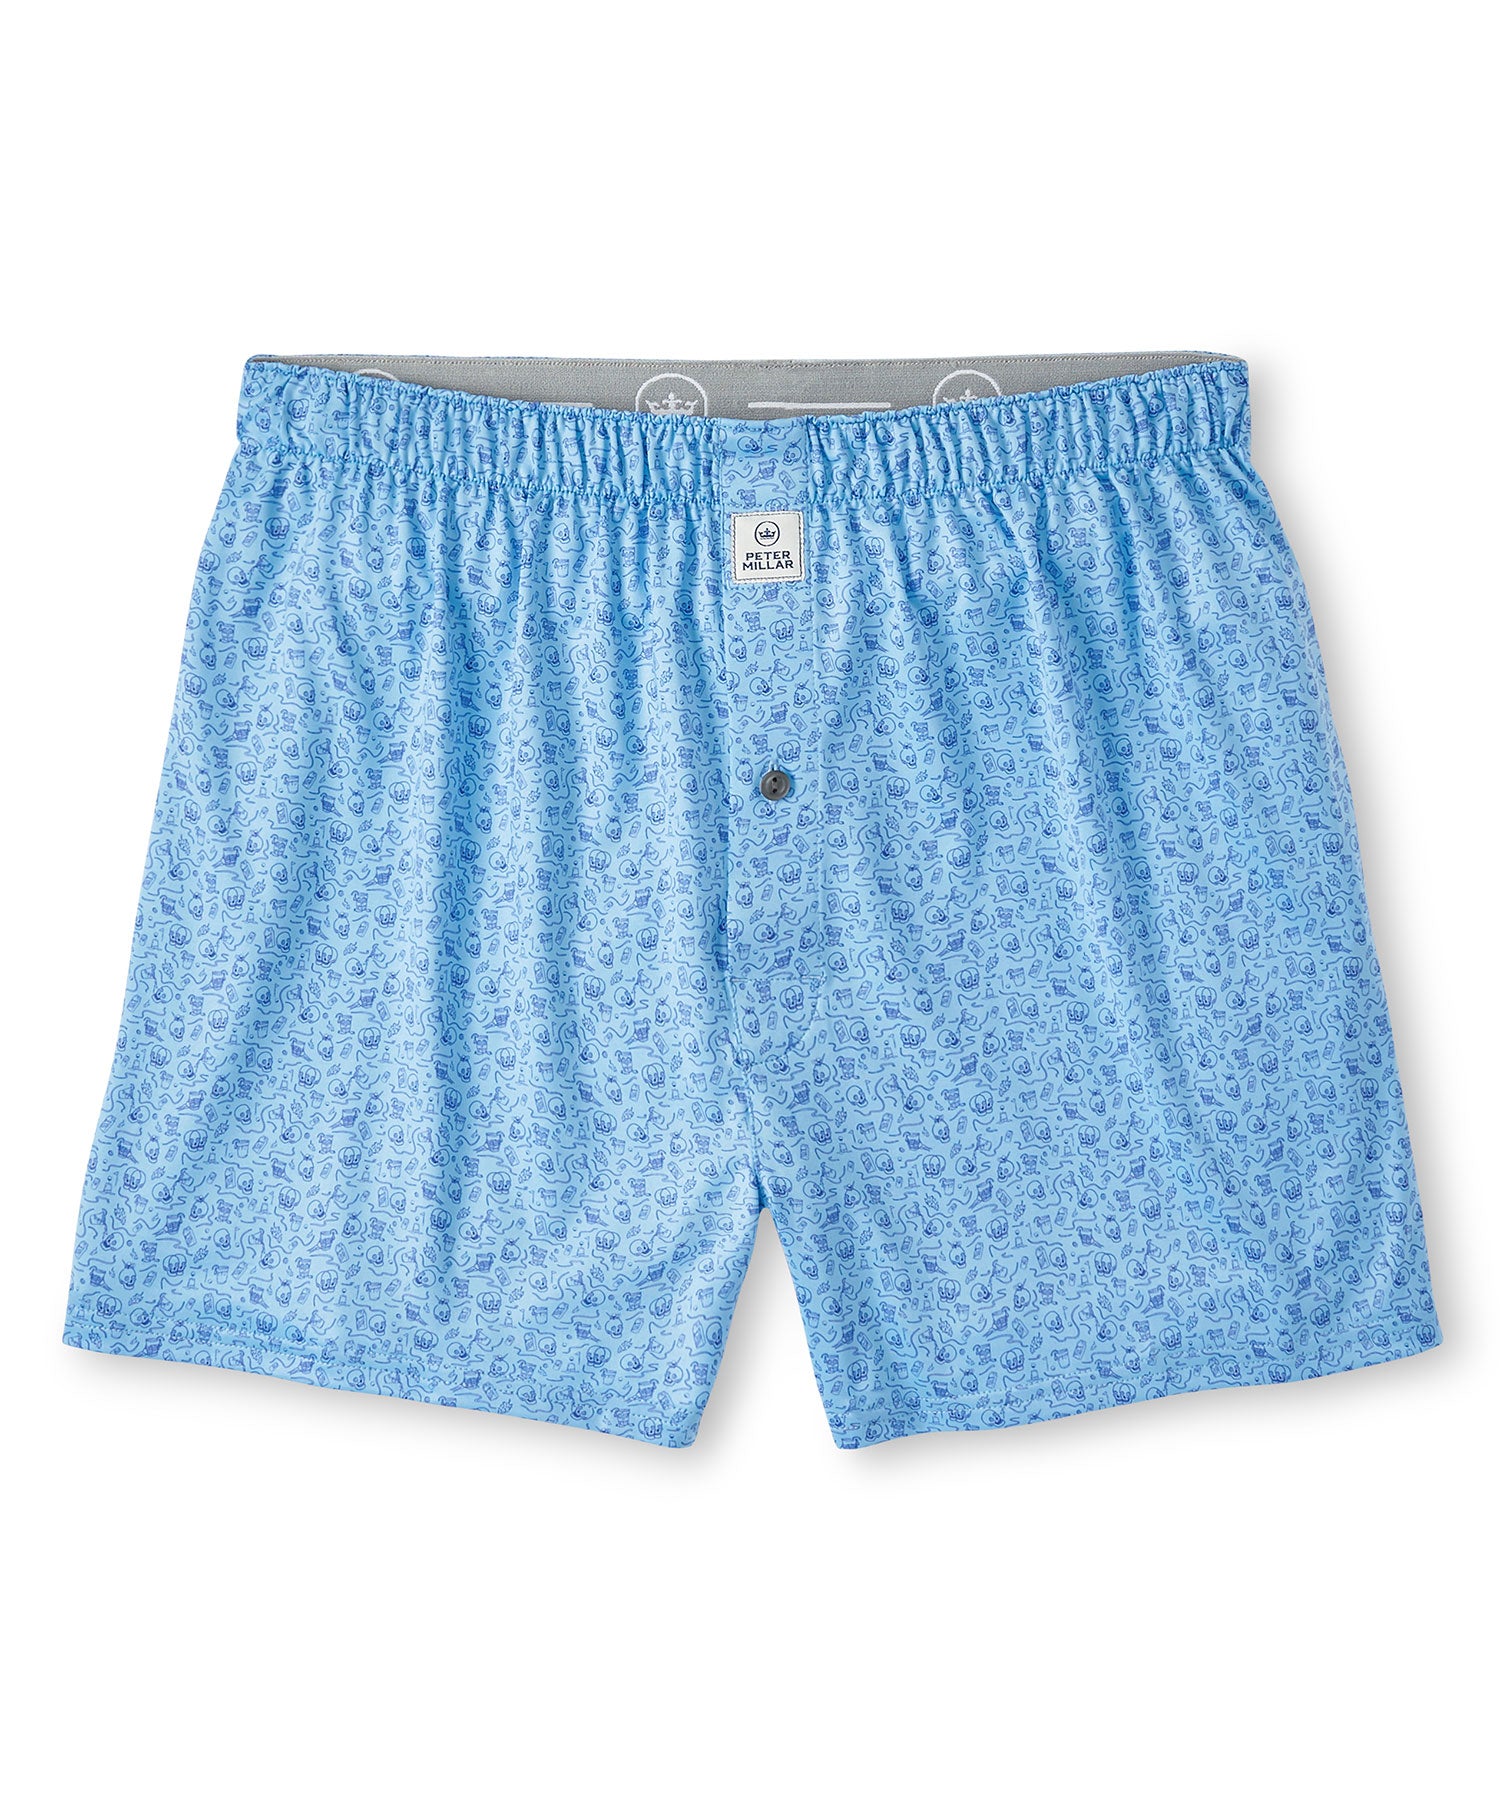 Peter Millar Double Transfused Performance Boxer